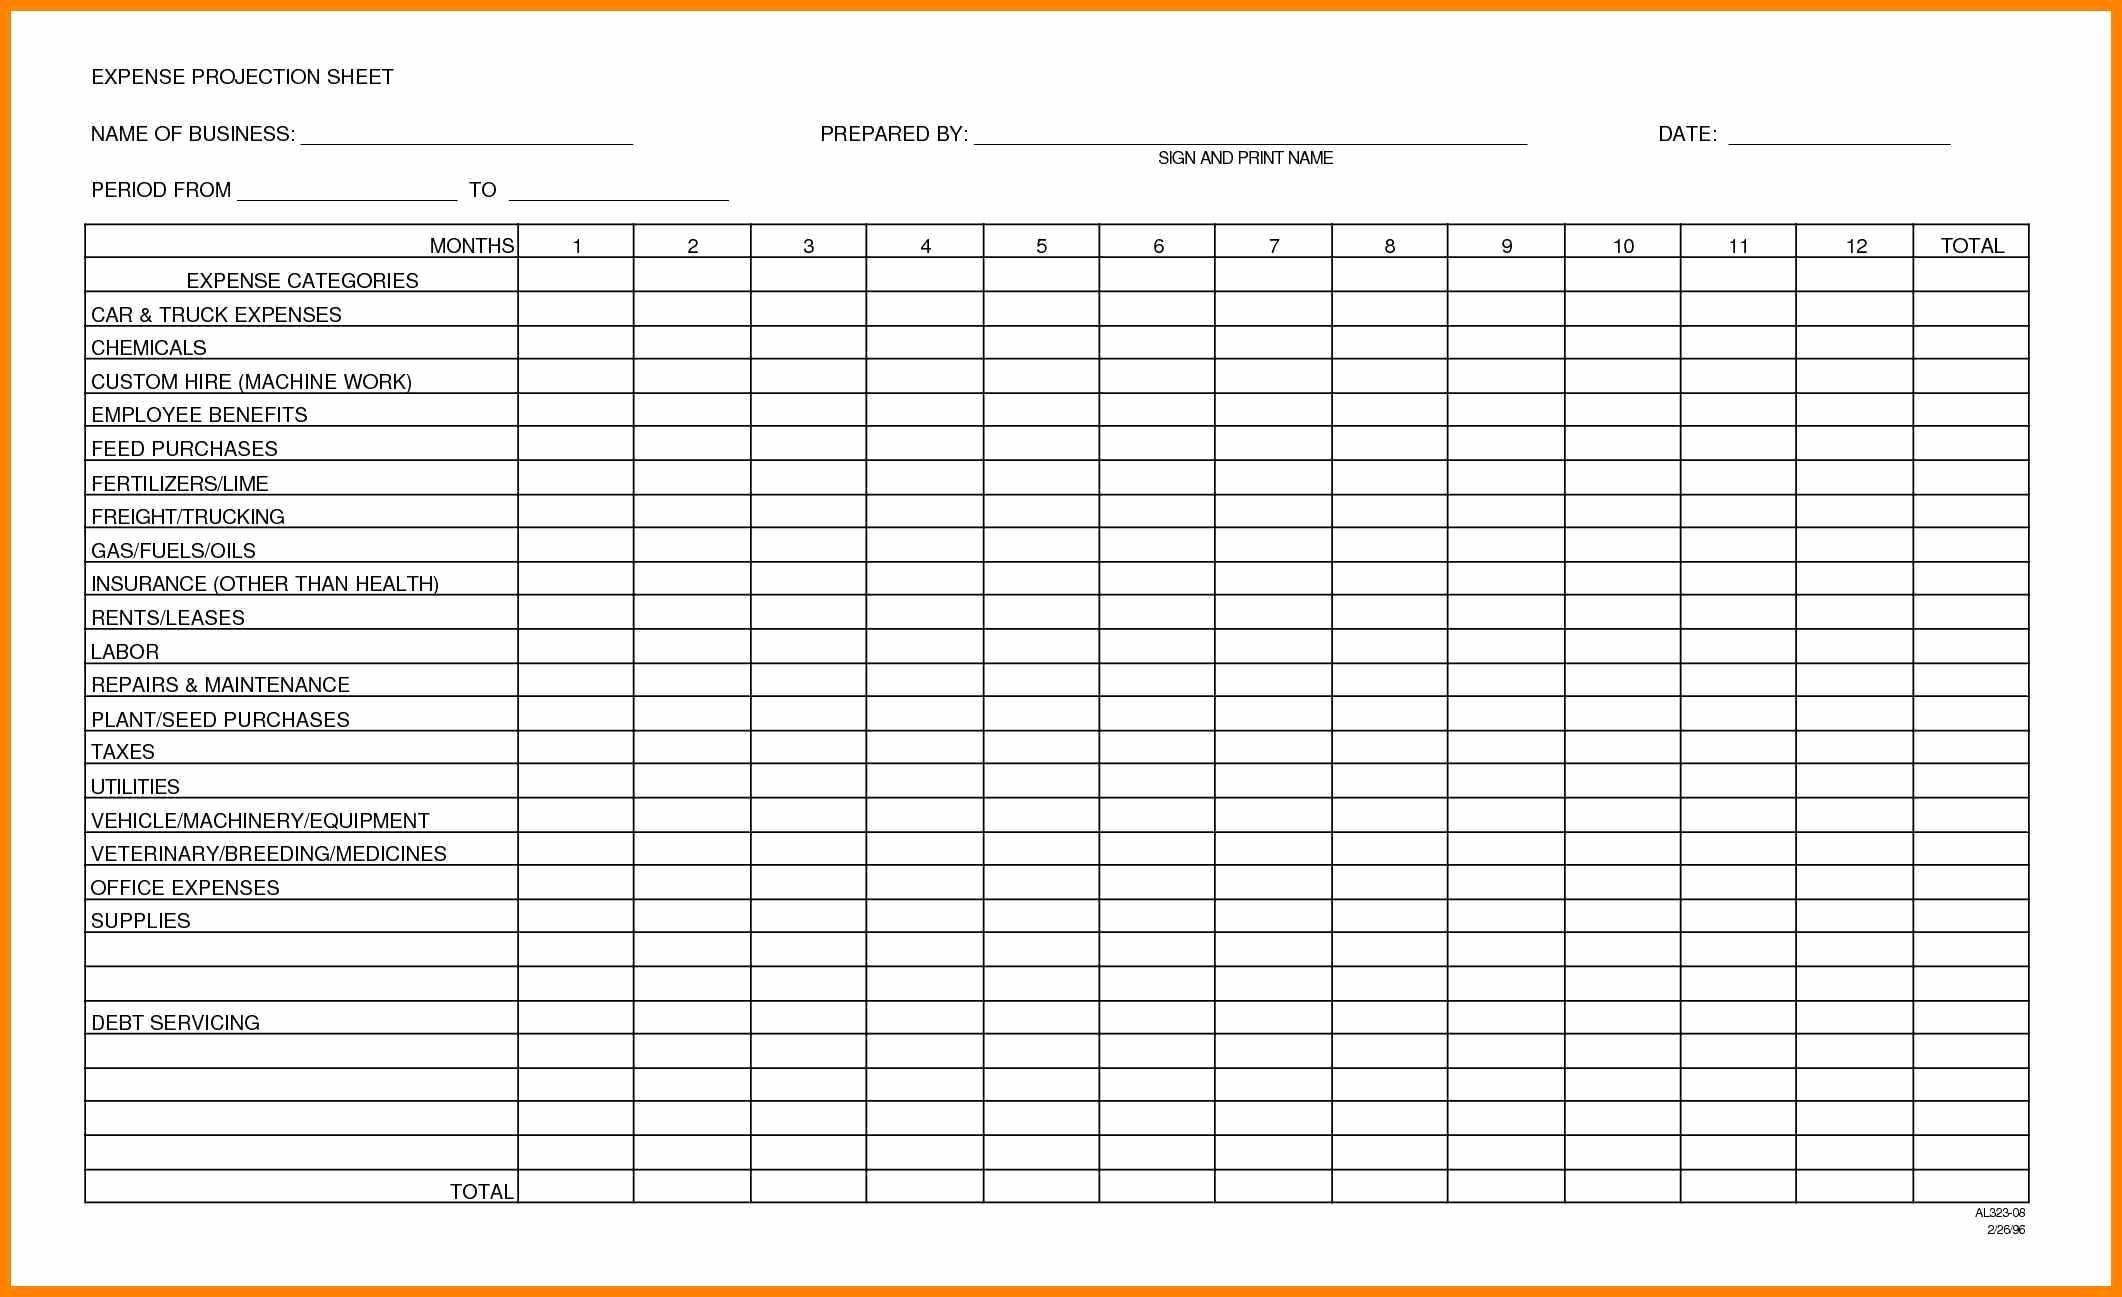 Business Expense Spreadsheet For Taxes Template Unique Pampl Small in Small Business Expense Spreadsheet Template